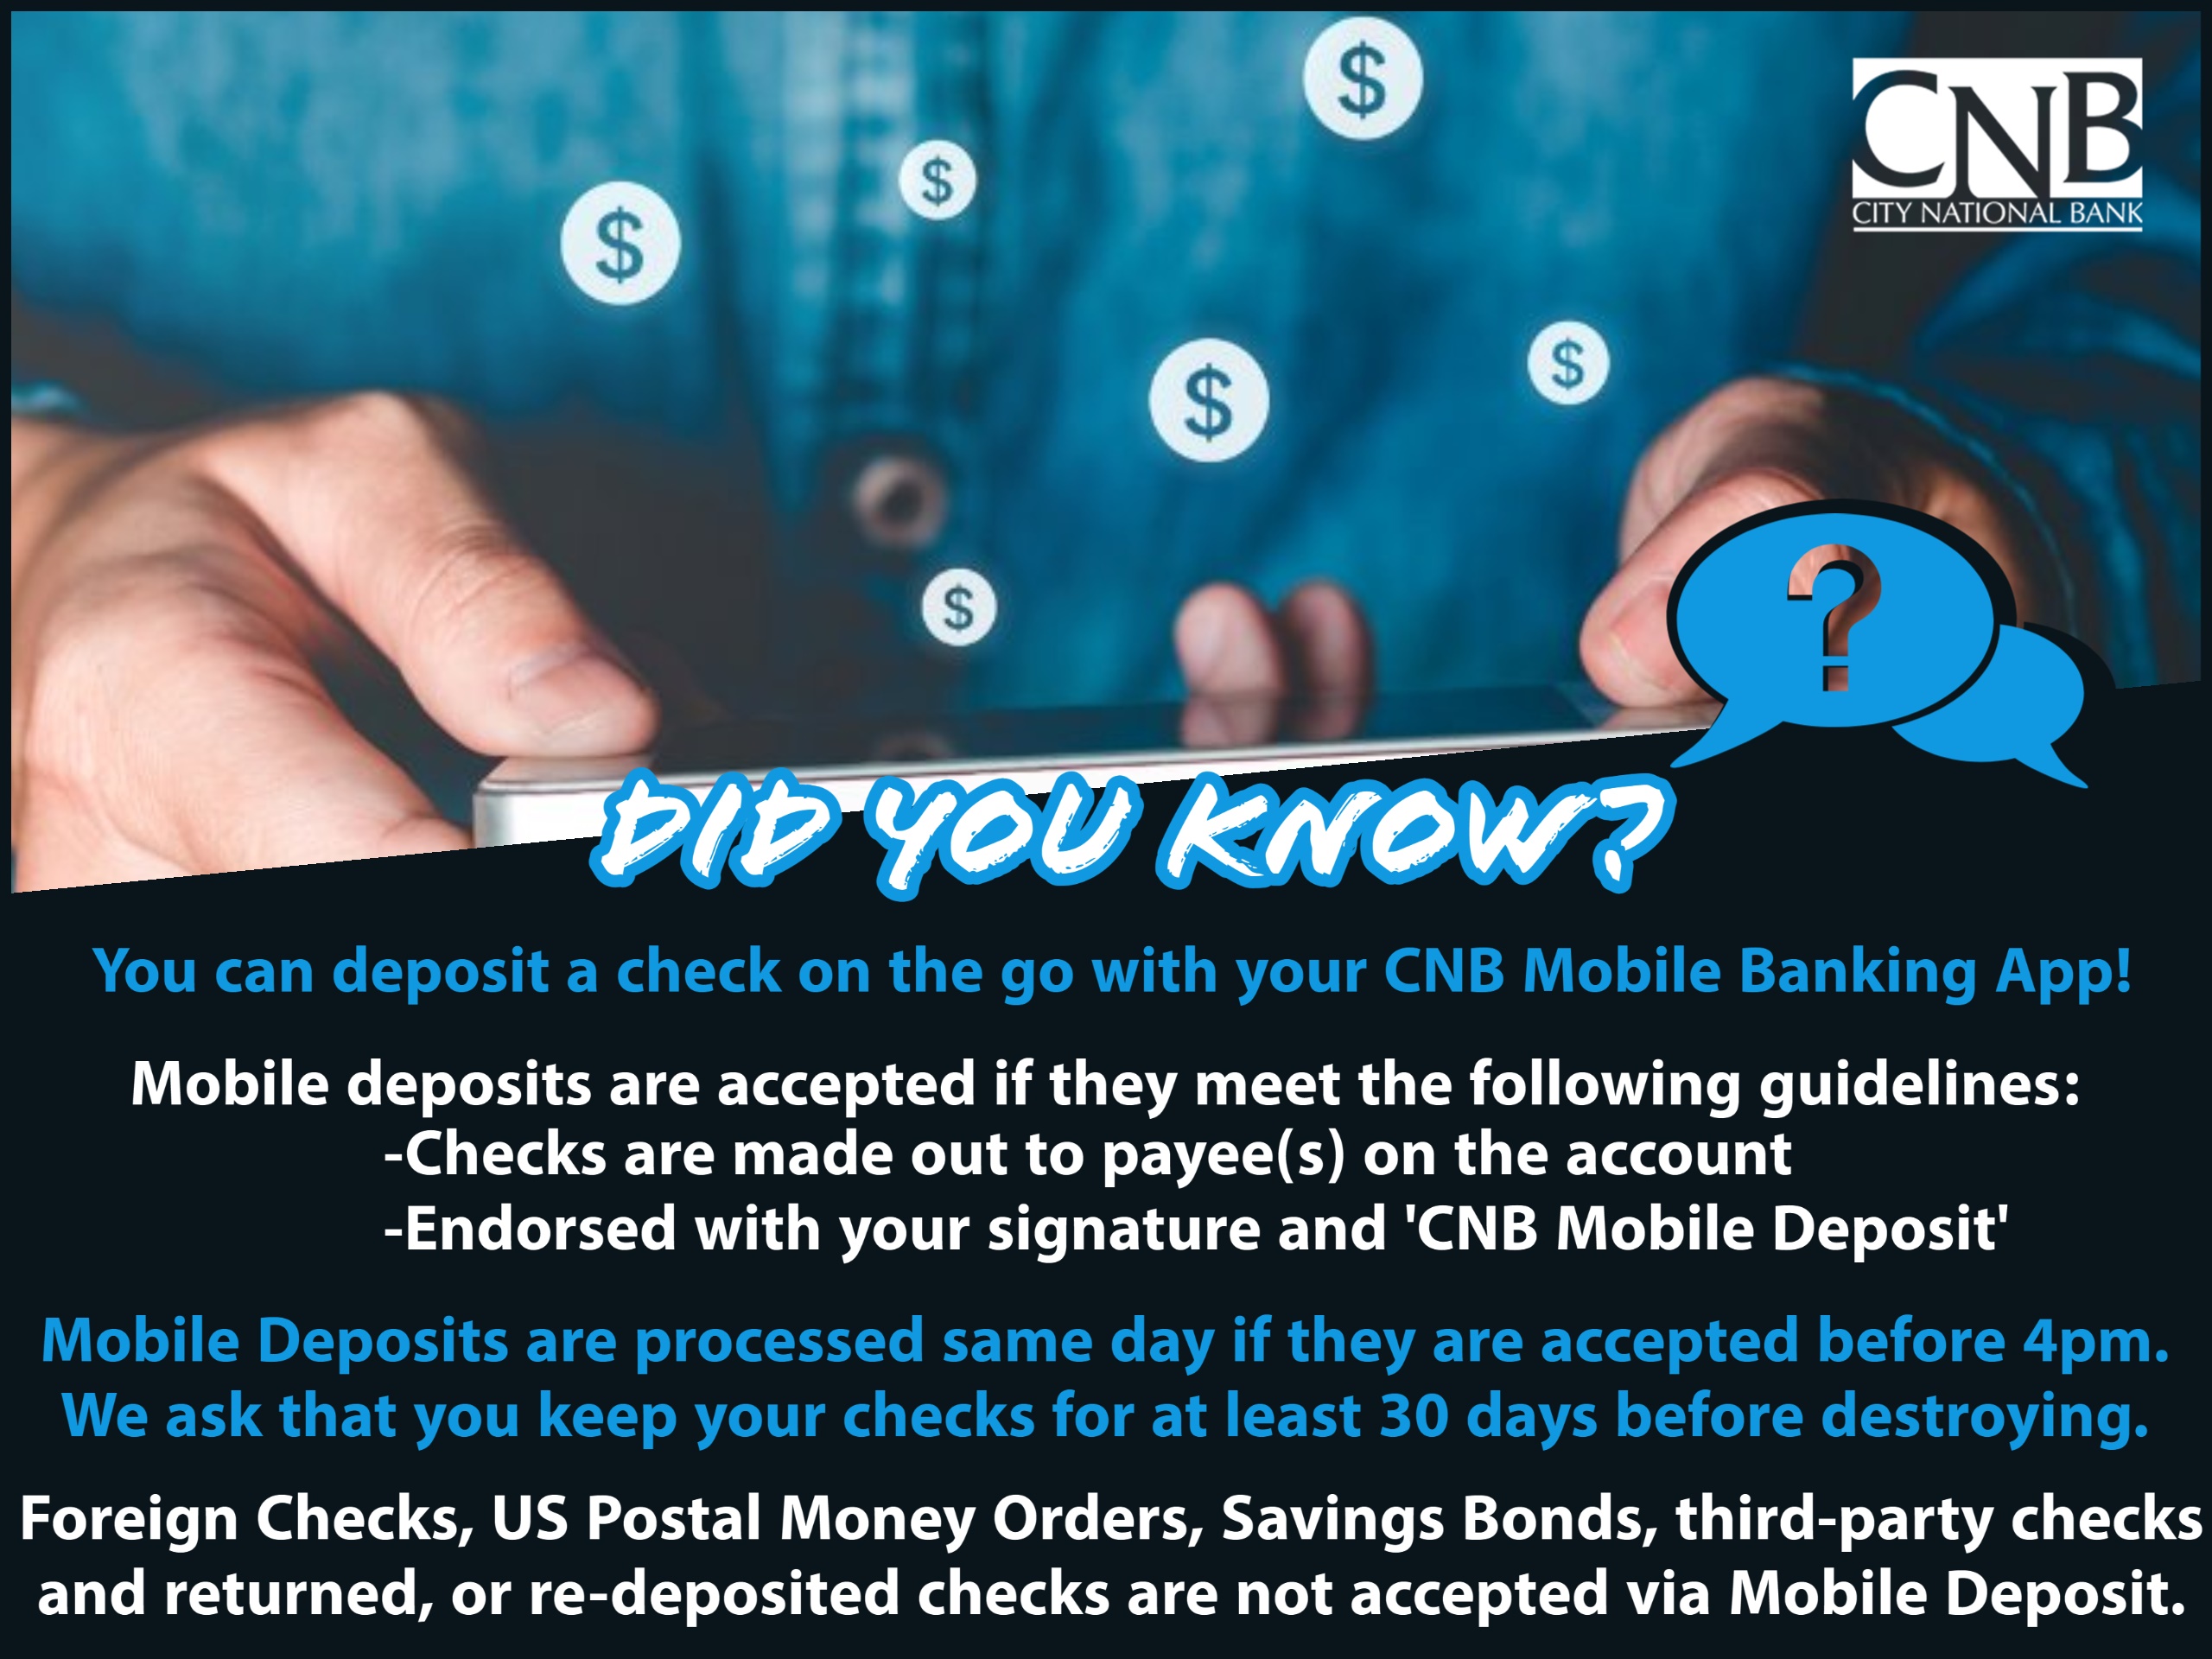 "Did you know" graphic explaining Mobile Deposit on the CNB mobile banking app